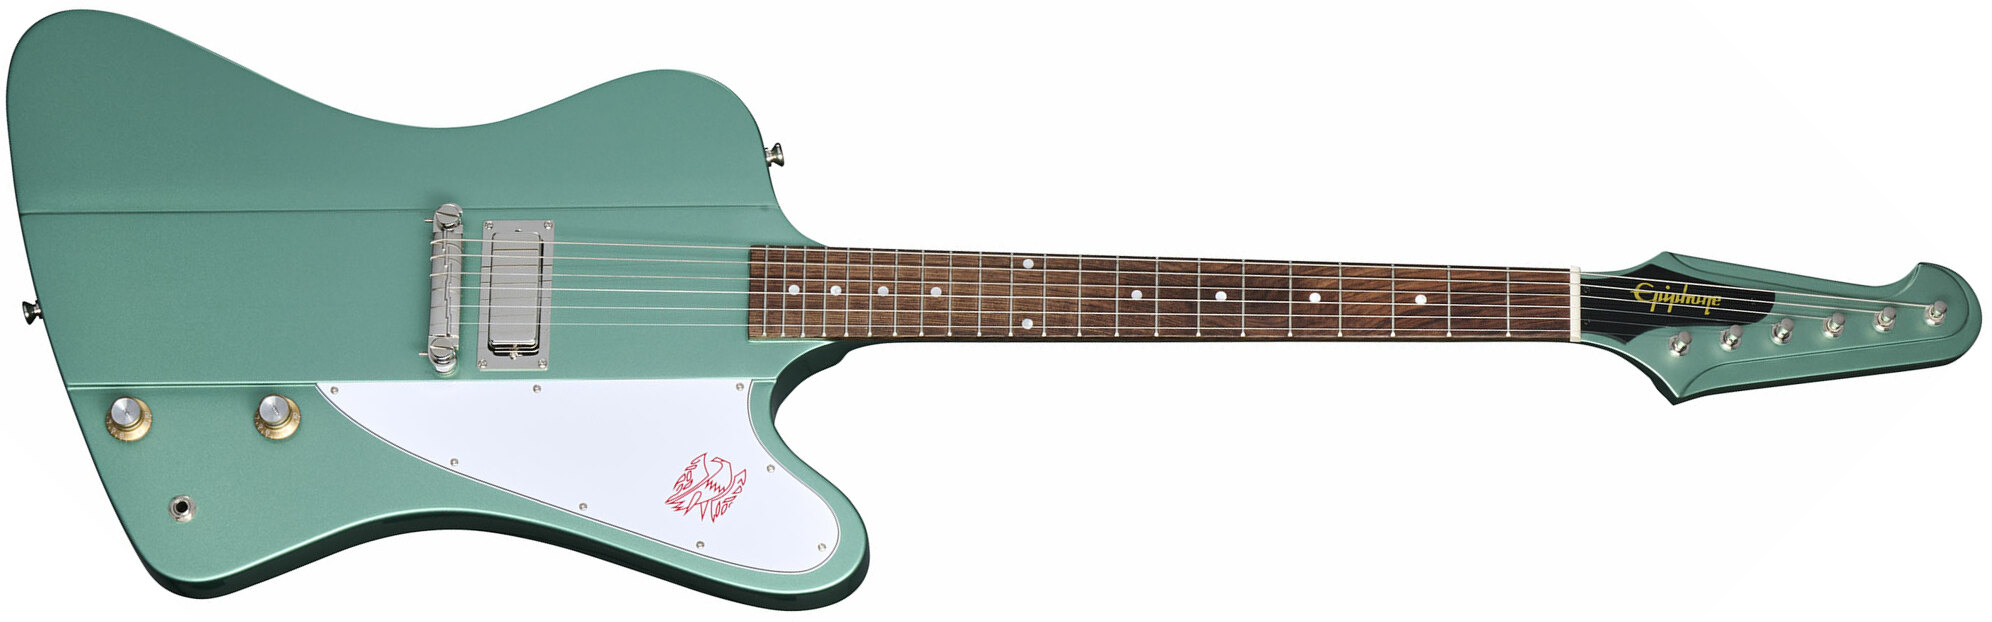 Epiphone Firebird I 1963 Inspired By Gibson Custom 1mh Ht Lau - Inverness Green - Retro rock electric guitar - Main picture